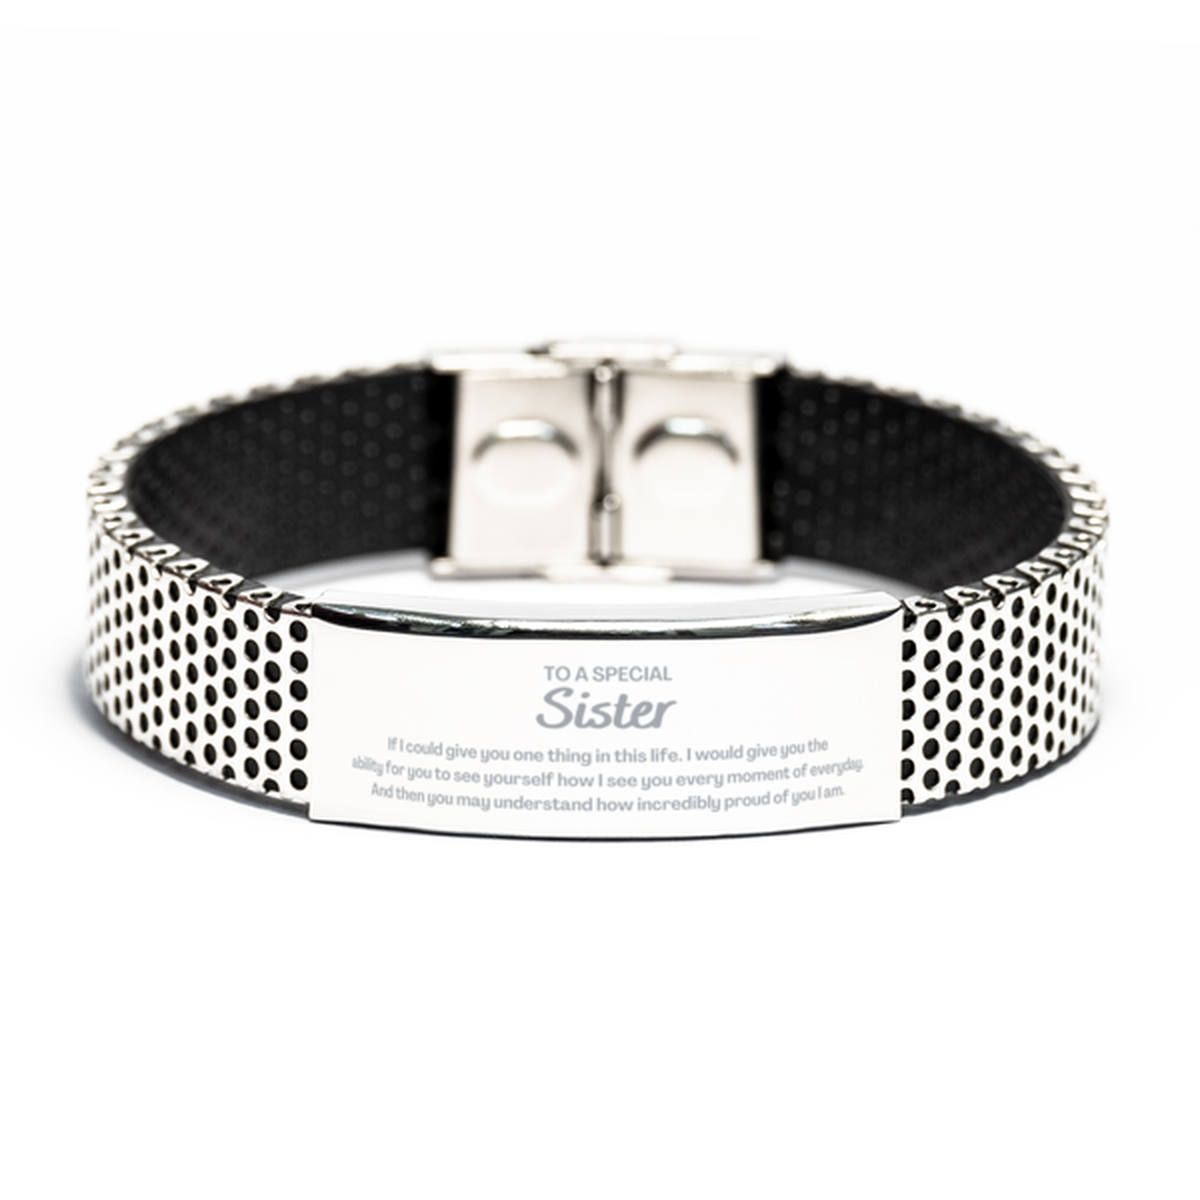 To My Sister Stainless Steel Bracelet, Gifts For Sister Engraved, Inspirational Gifts for Christmas Birthday, Epic Gifts for Sister To A Special Sister how incredibly proud of you I am